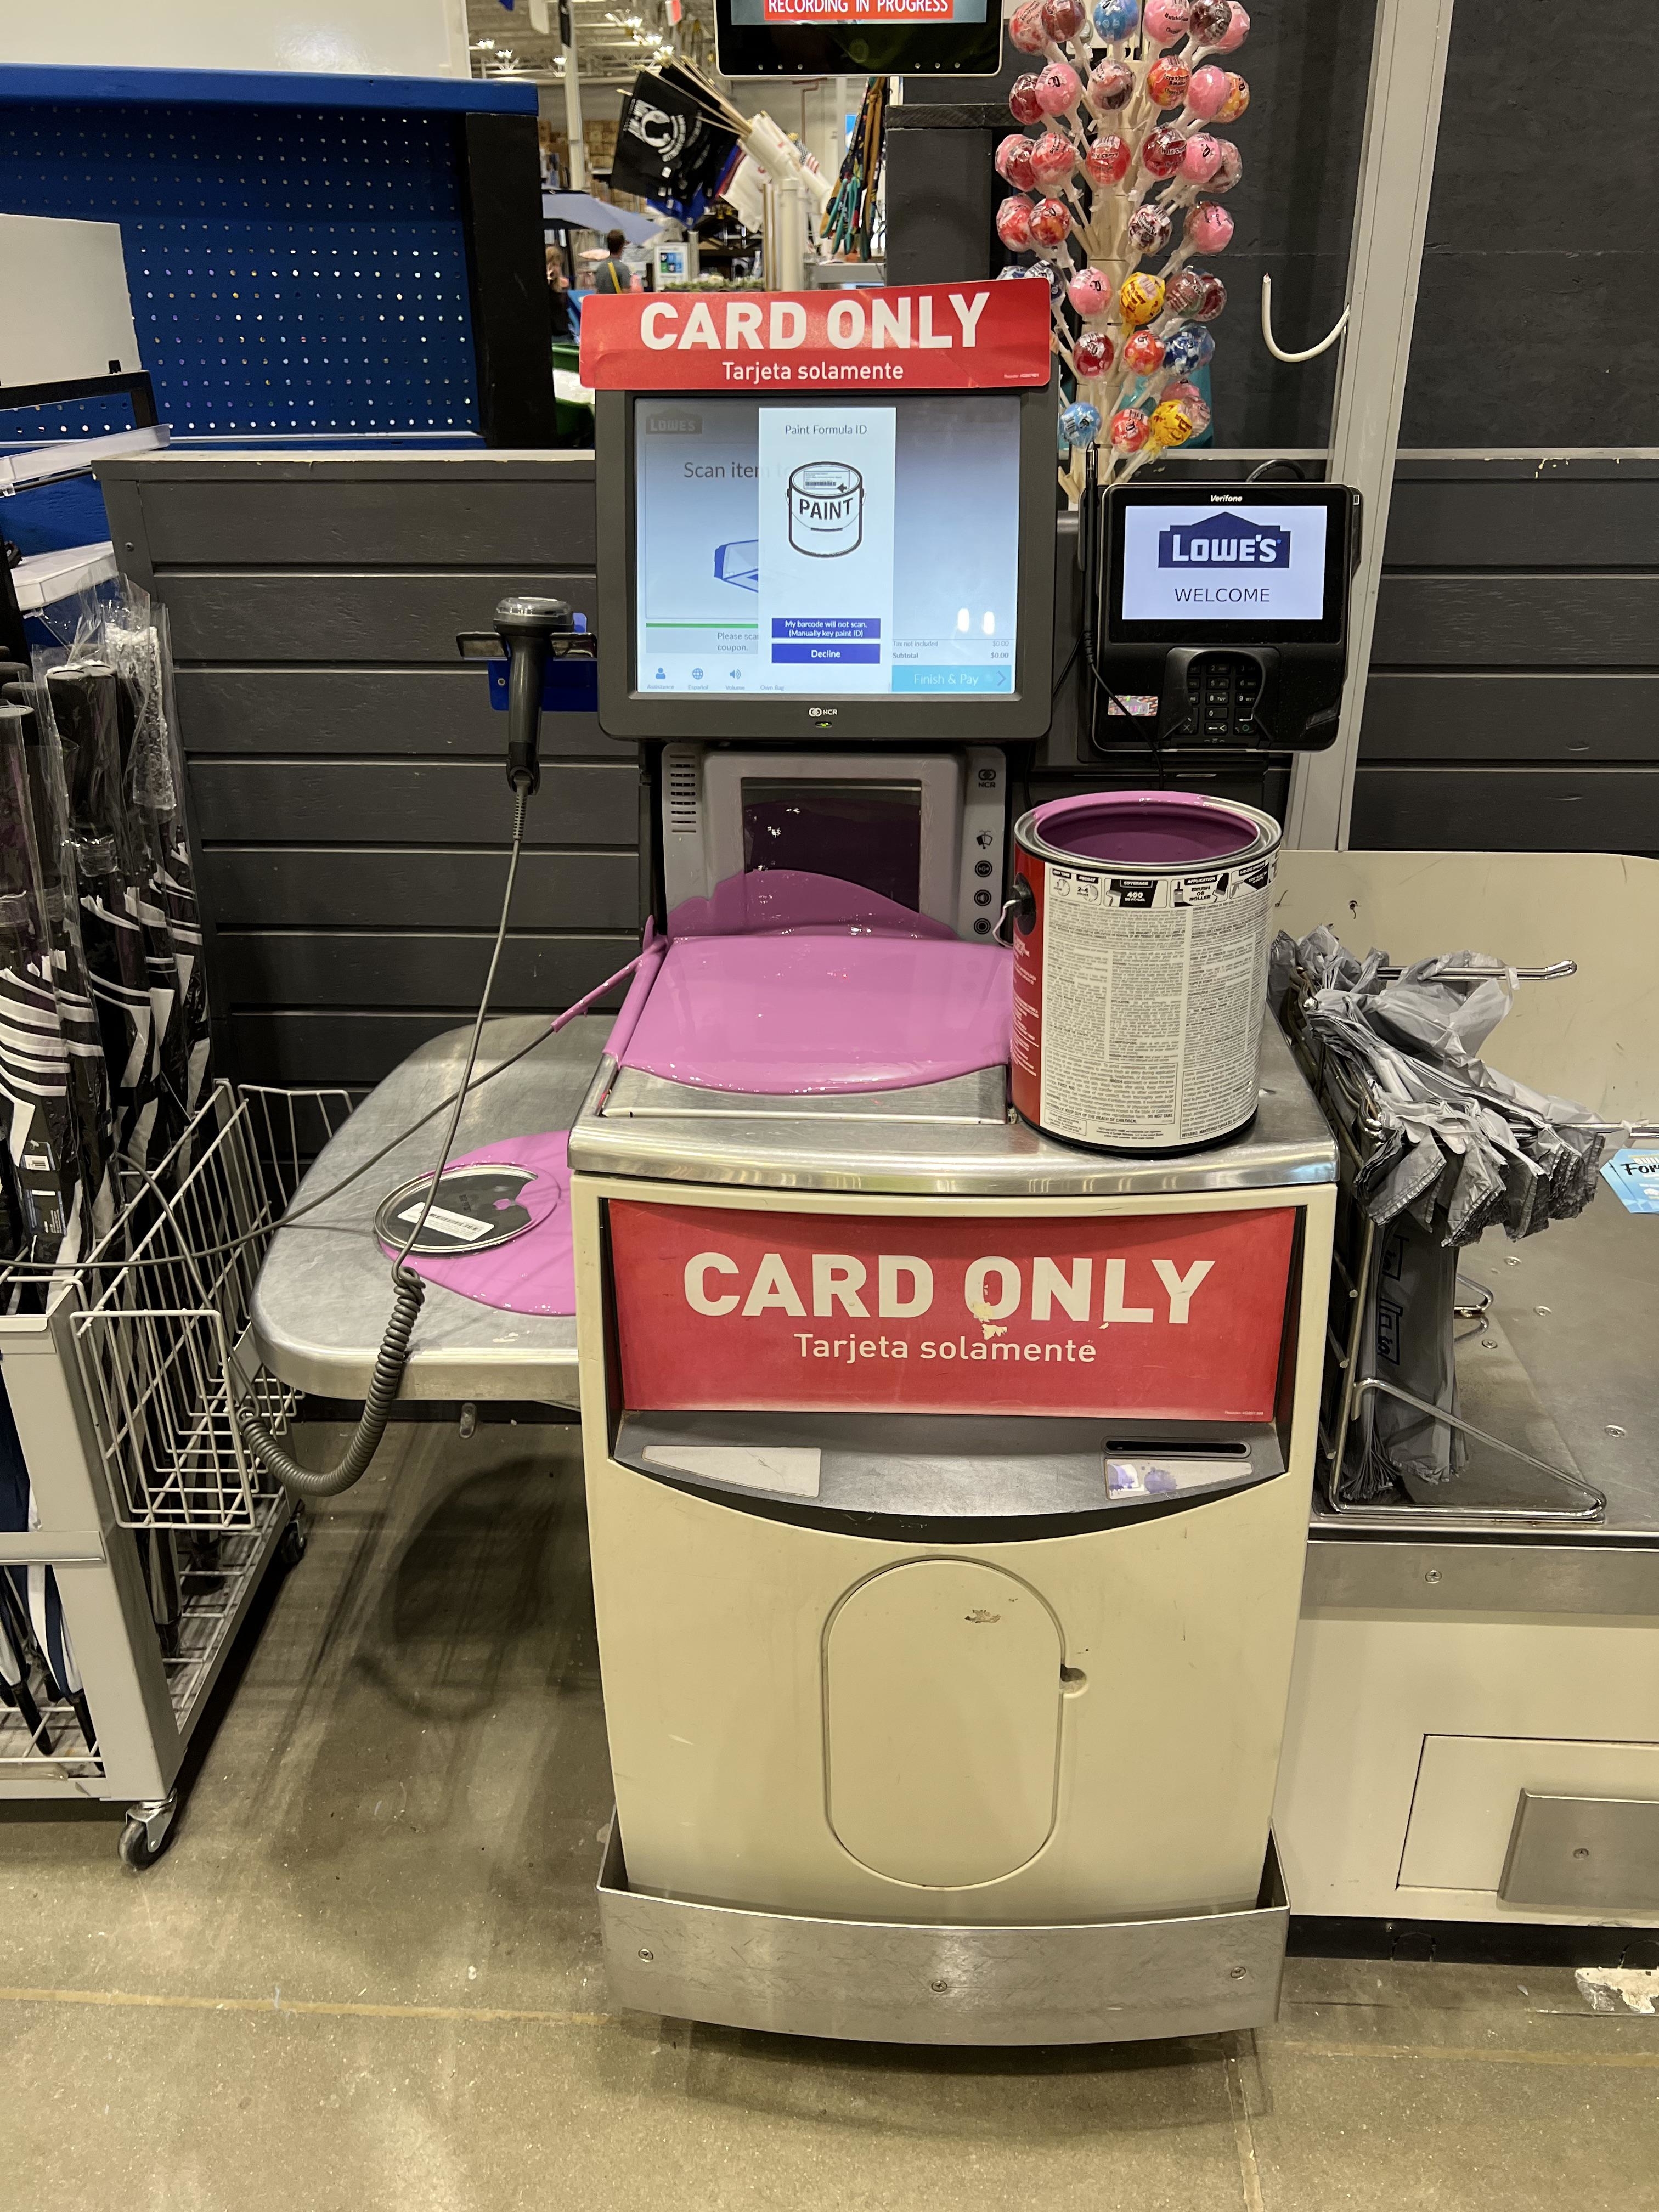 Self-checkout kiosk with &quot;CARD ONLY&quot; sign, screen prompts for payment, and a shopping basket with items on it